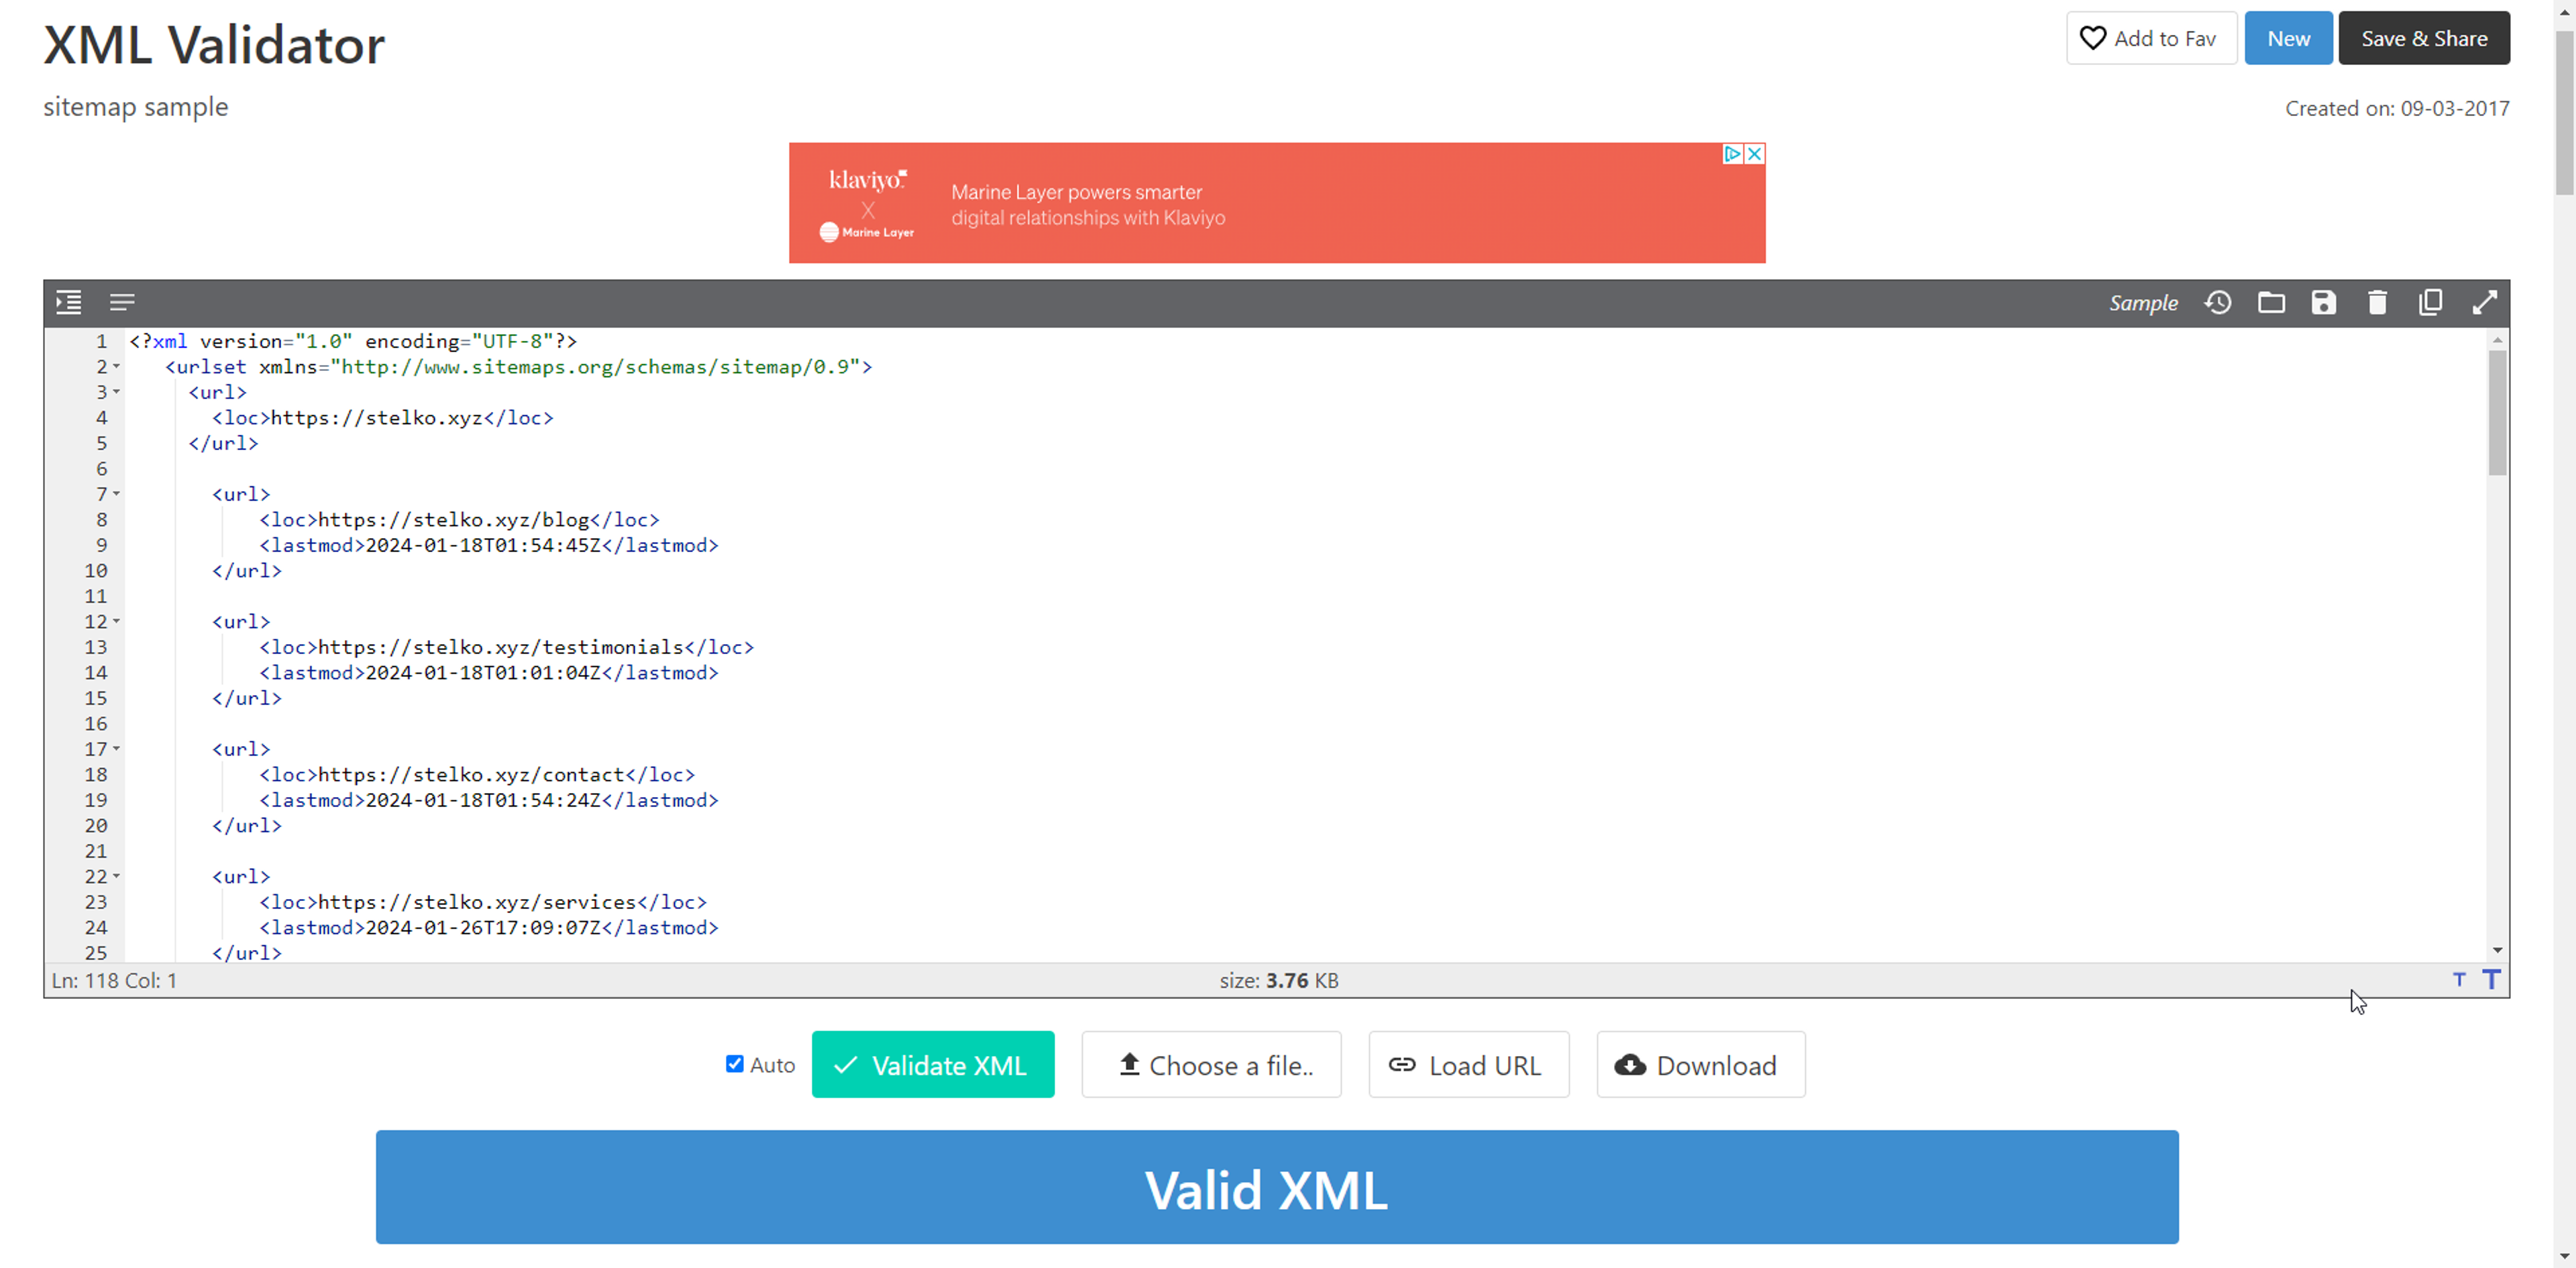 XML sitemap being validated through an online validator, results came back valid